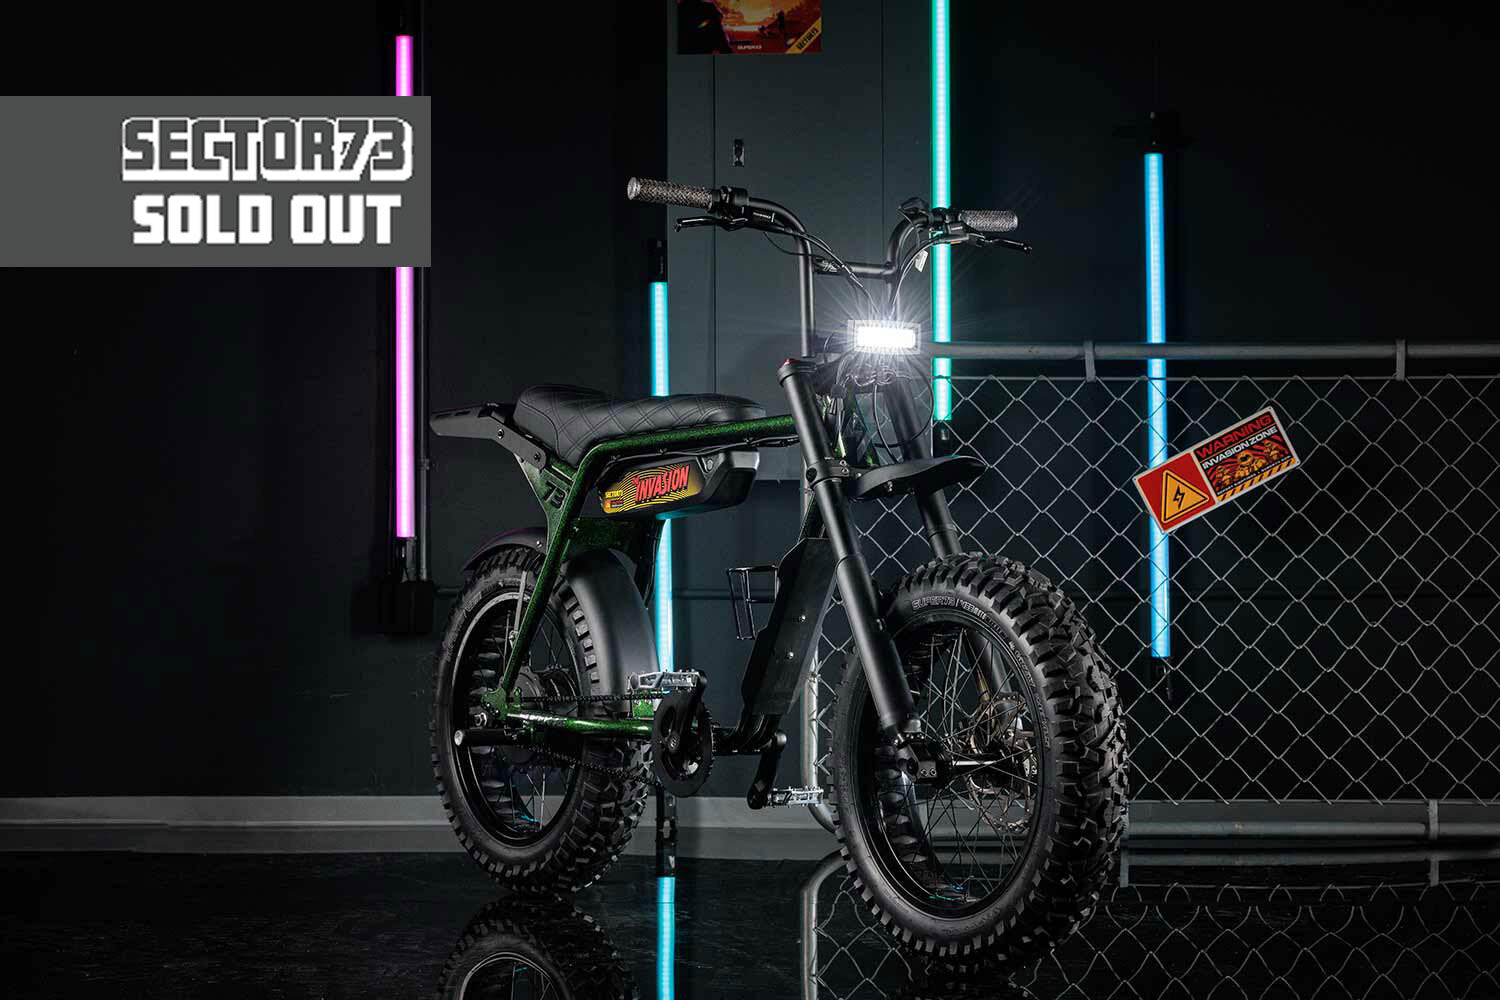 Front angle image of the SOLD OUT SECTOR73 ZX First Contact bike.